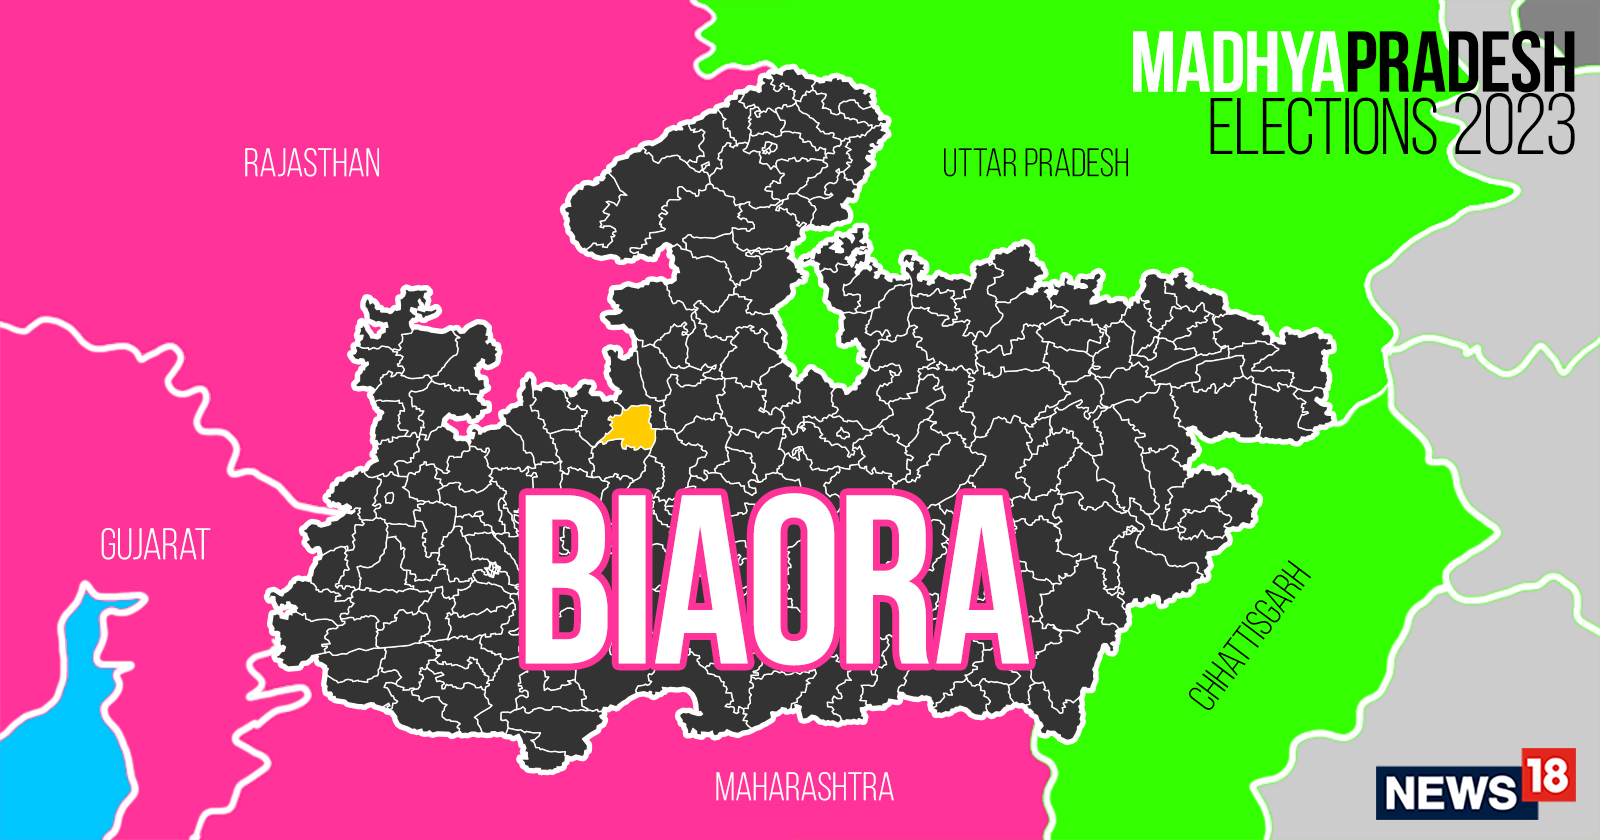 Biaora (General) Assembly constituency in Madhya Pradesh